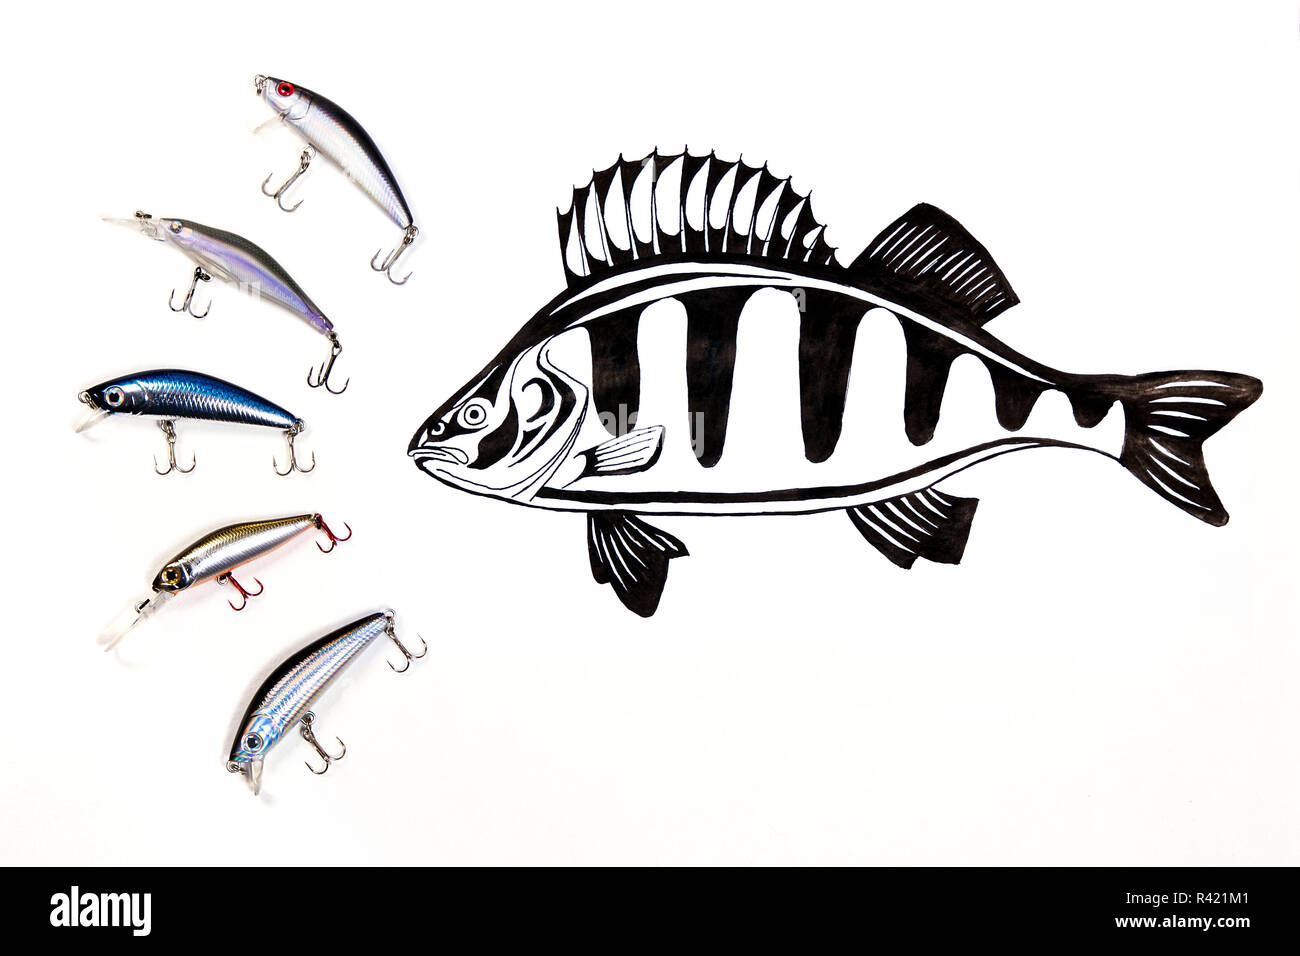 Different kinds of the fishing plastic baits with ink drawing fish on the white background. Stock Photo